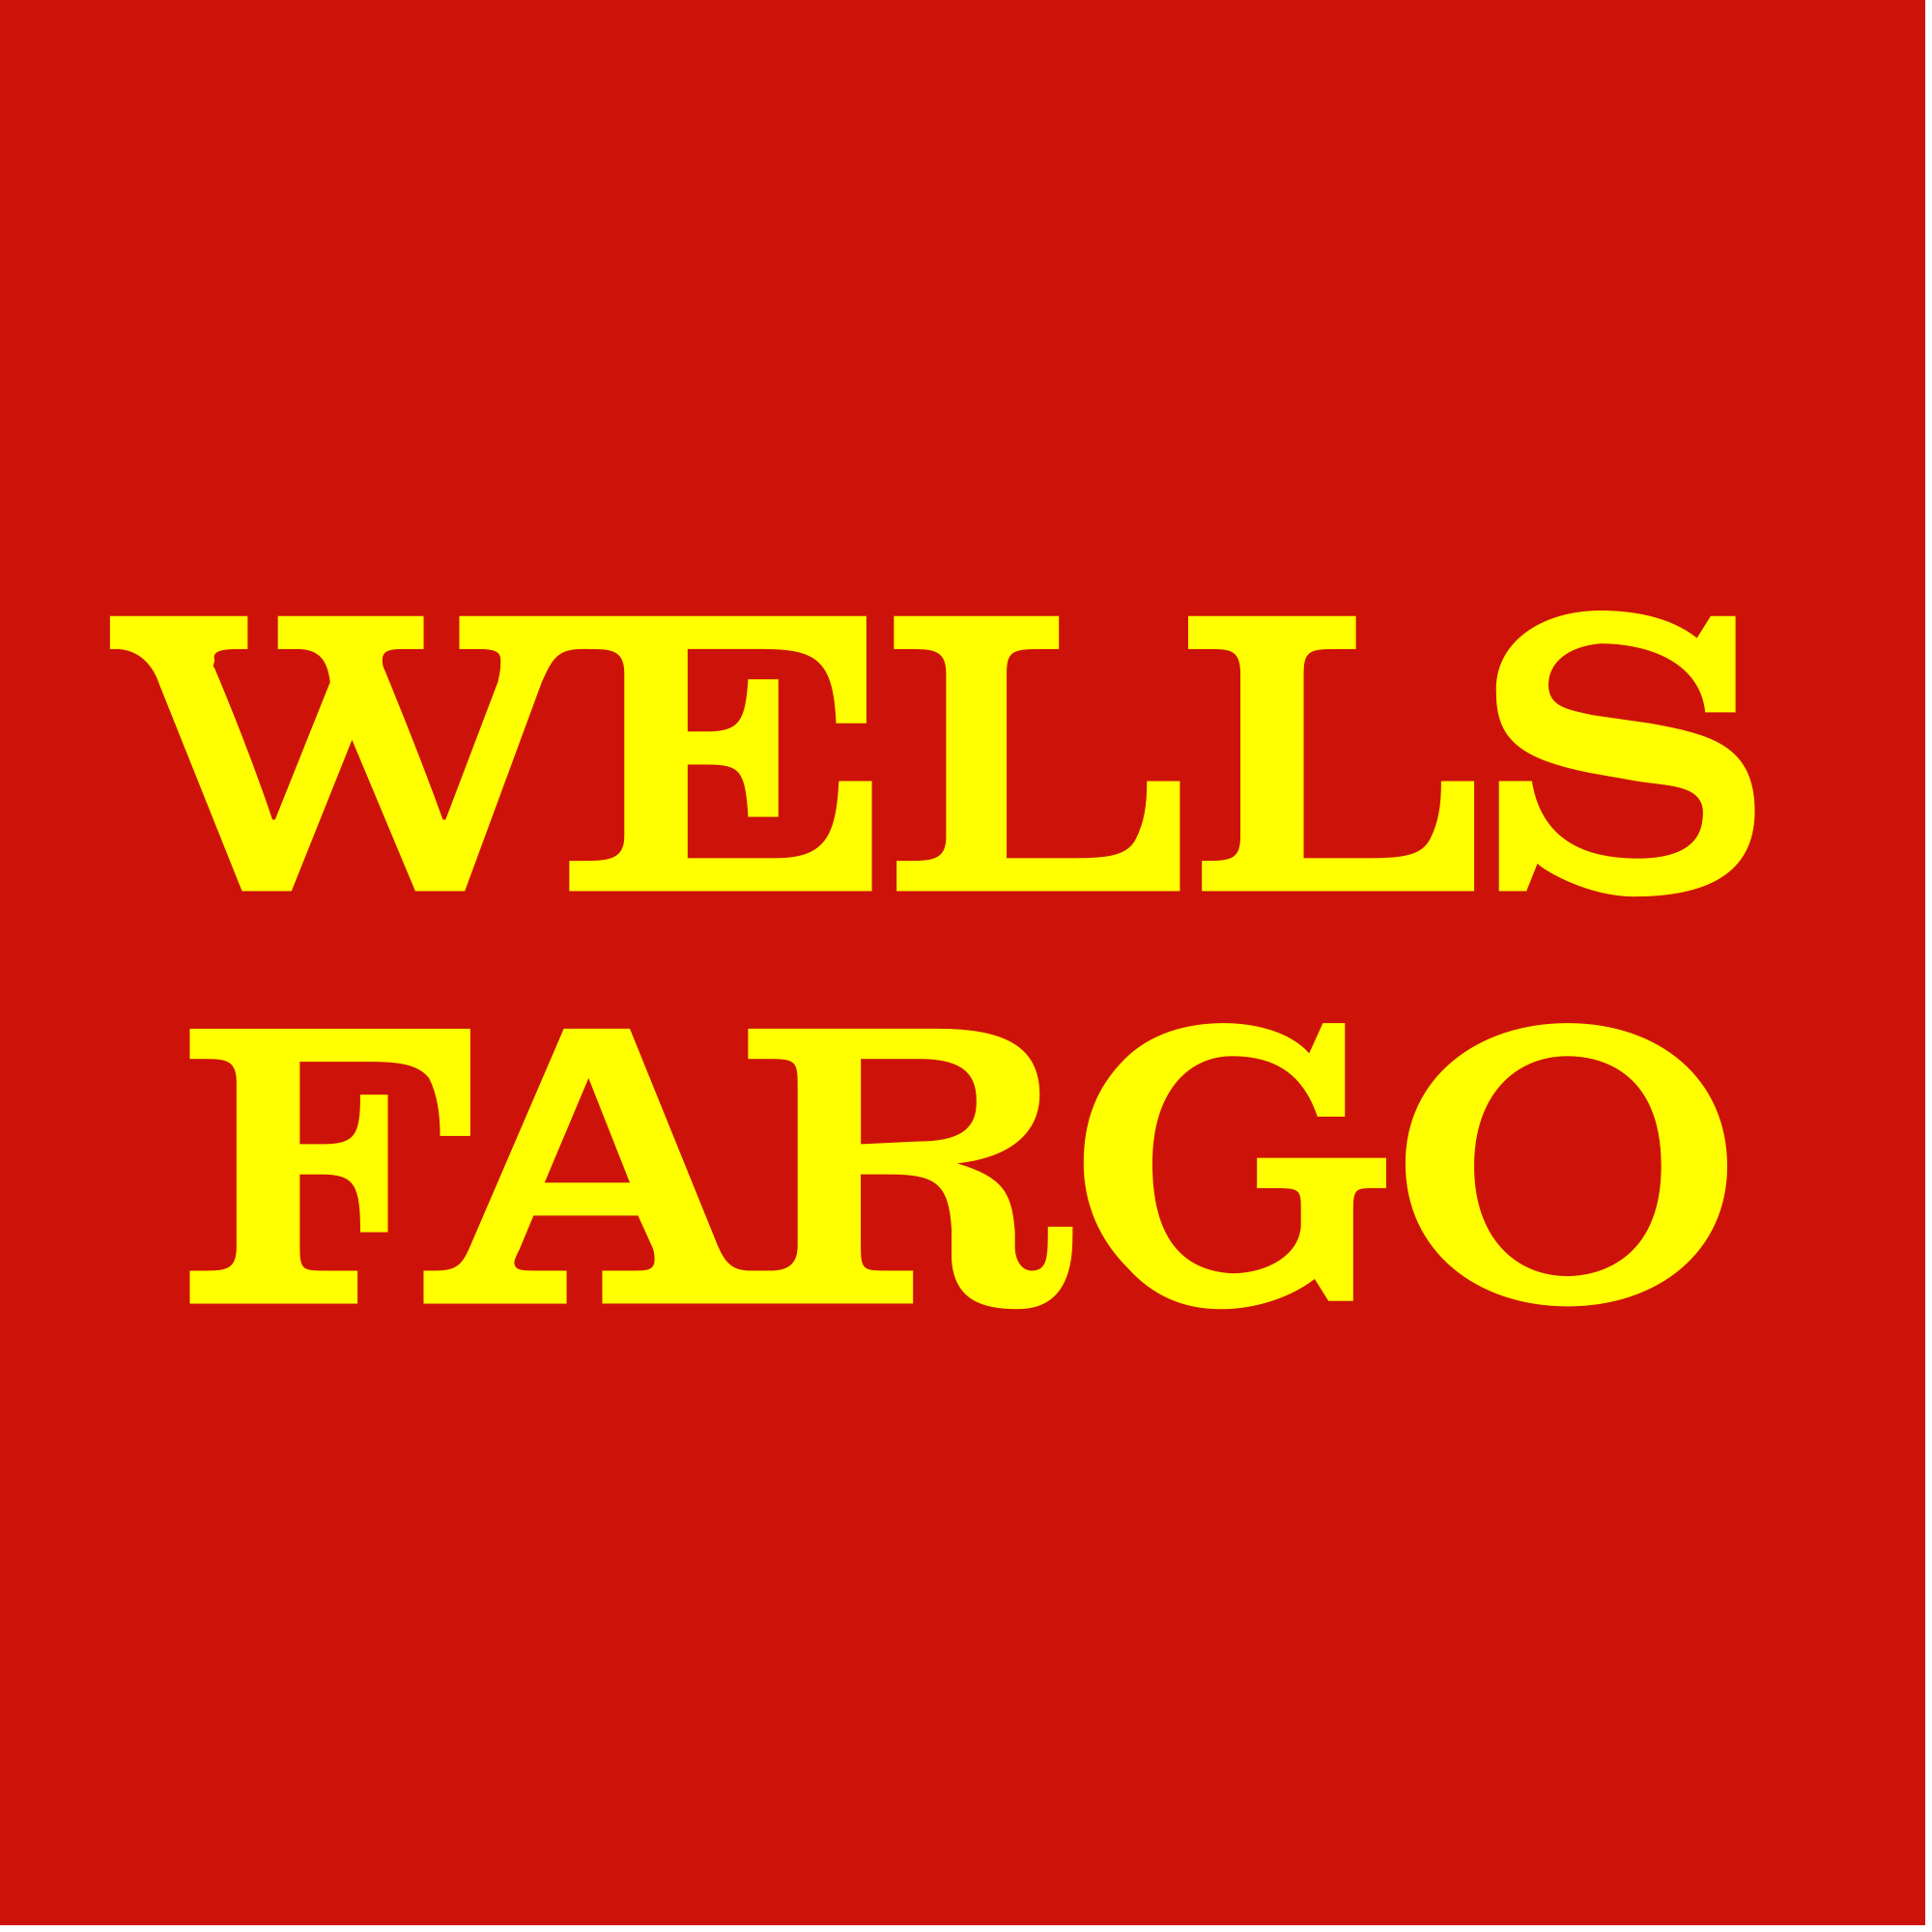 Former Wells Fargo Exec Settles SEC Fraud Charges, to Pay $3M